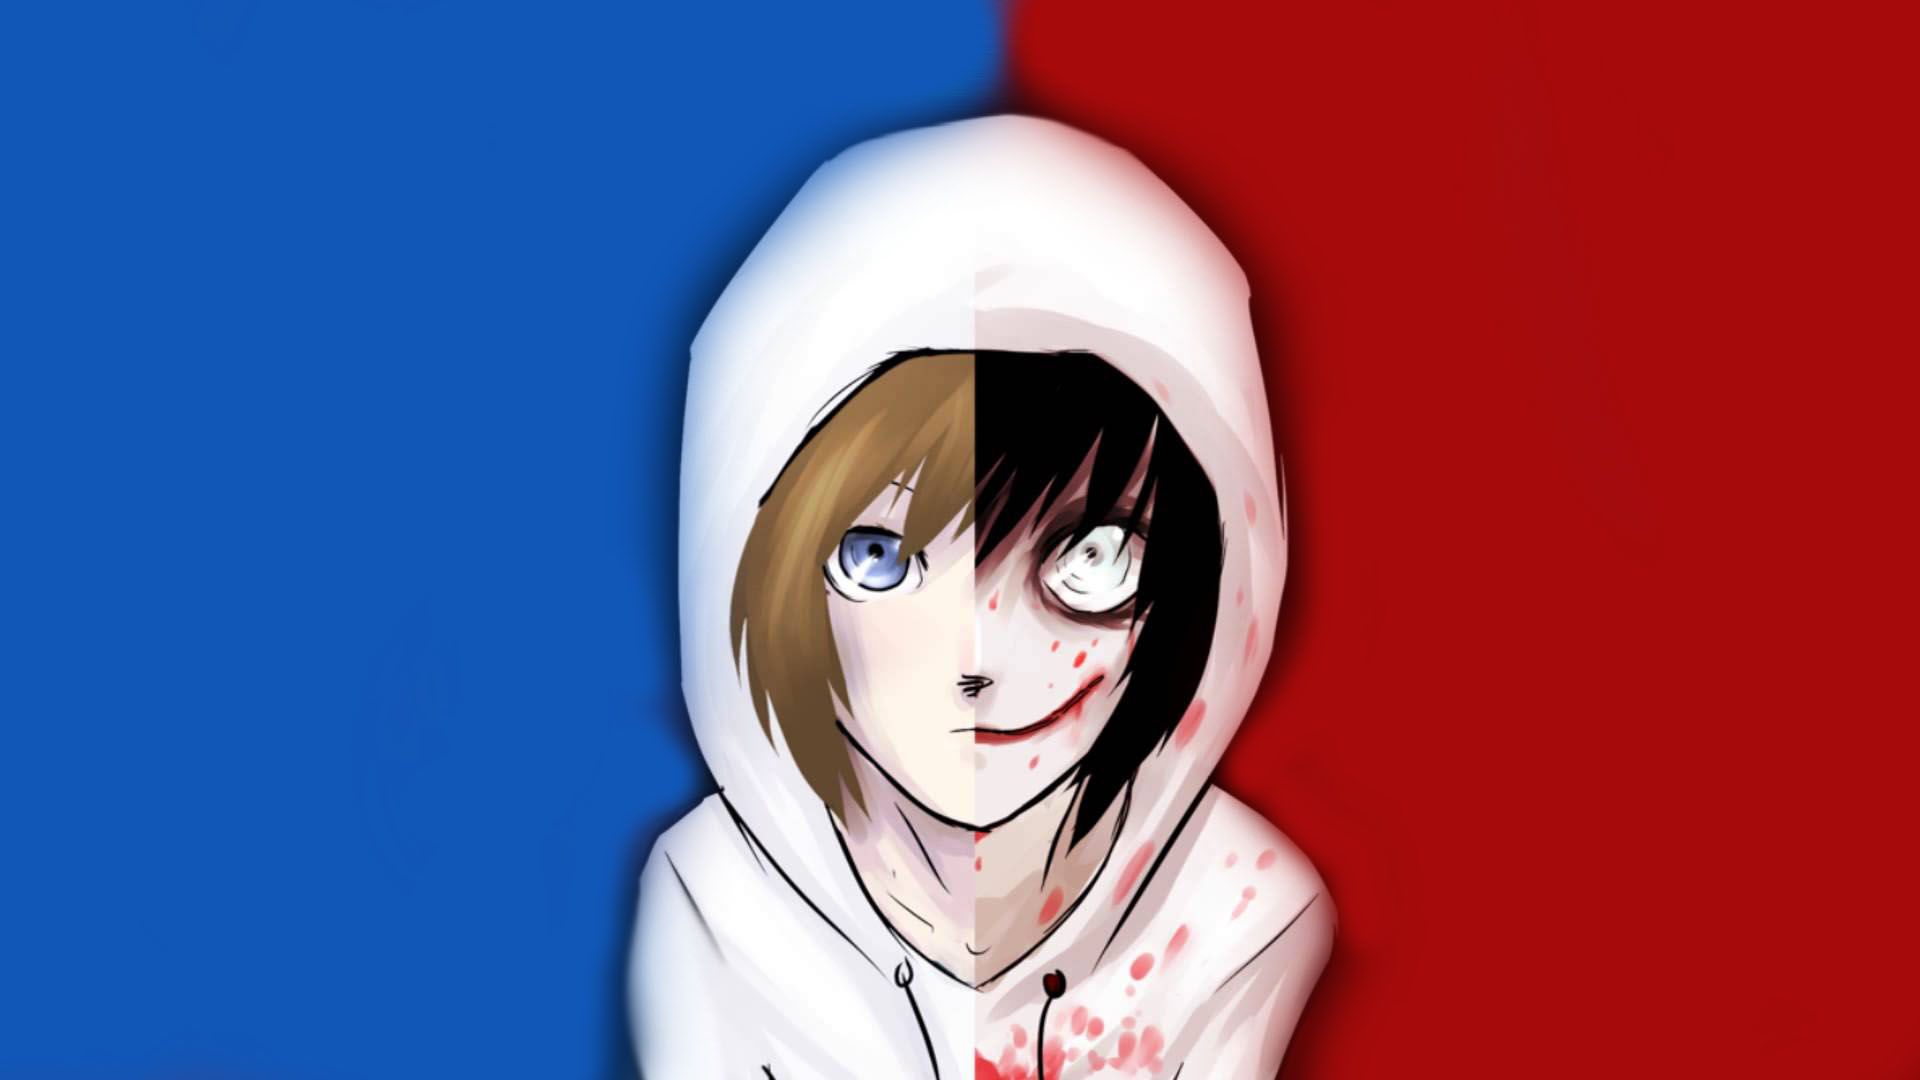 Tons of awesome Eyeless Jack Slenderman Jeff The Killer wallpapers to downl...